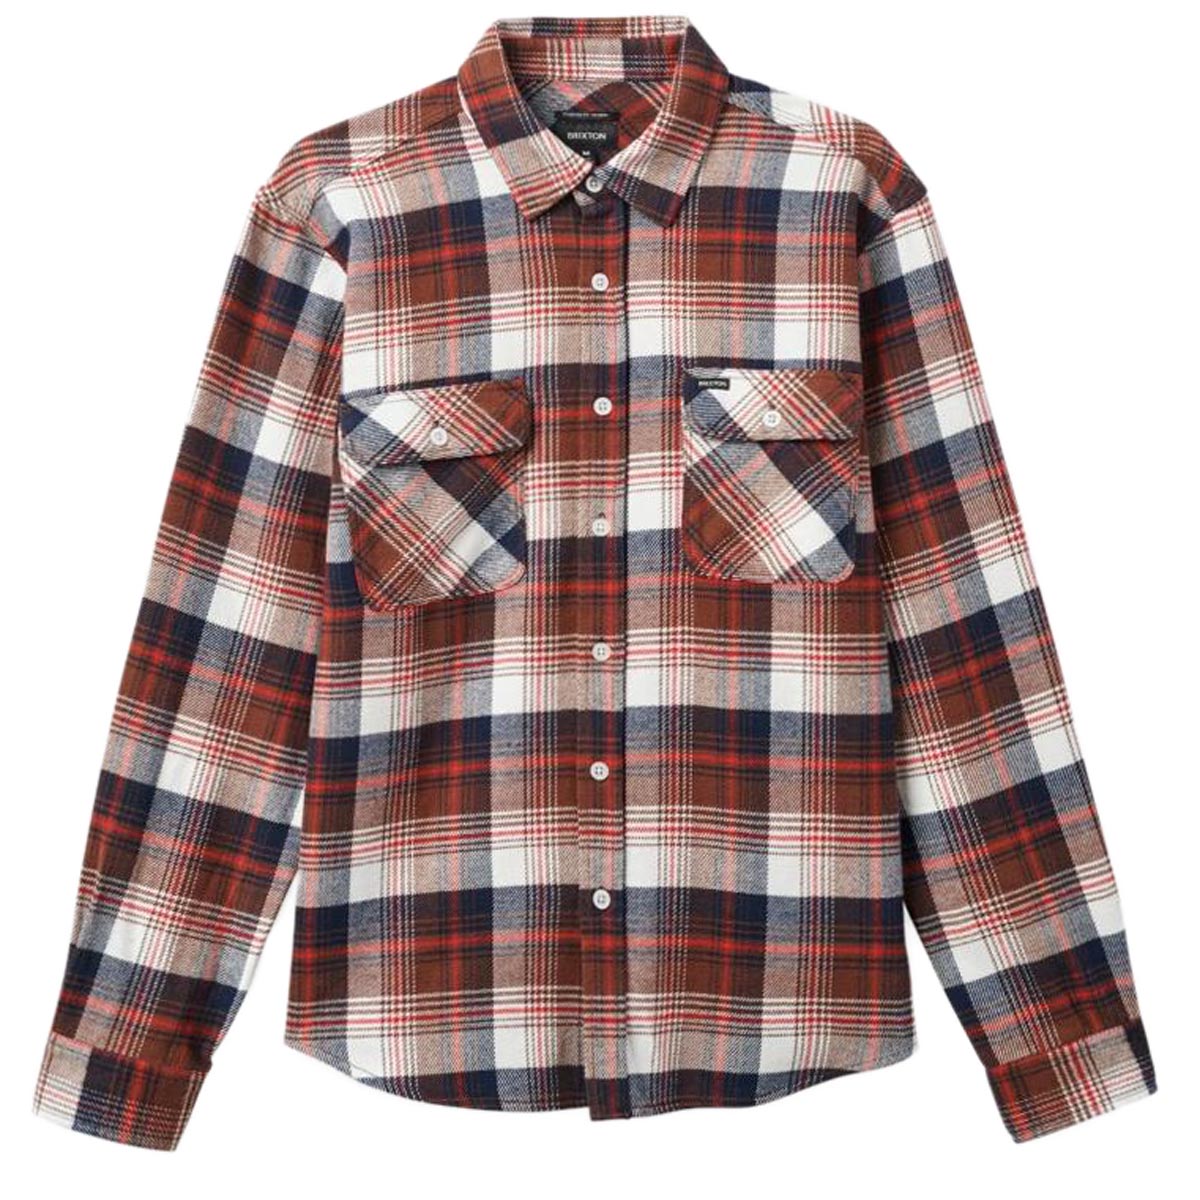 Brixton Bowery Flannel Long Sleeve Shirt - Washed Navy/Sepia/Off White image 3